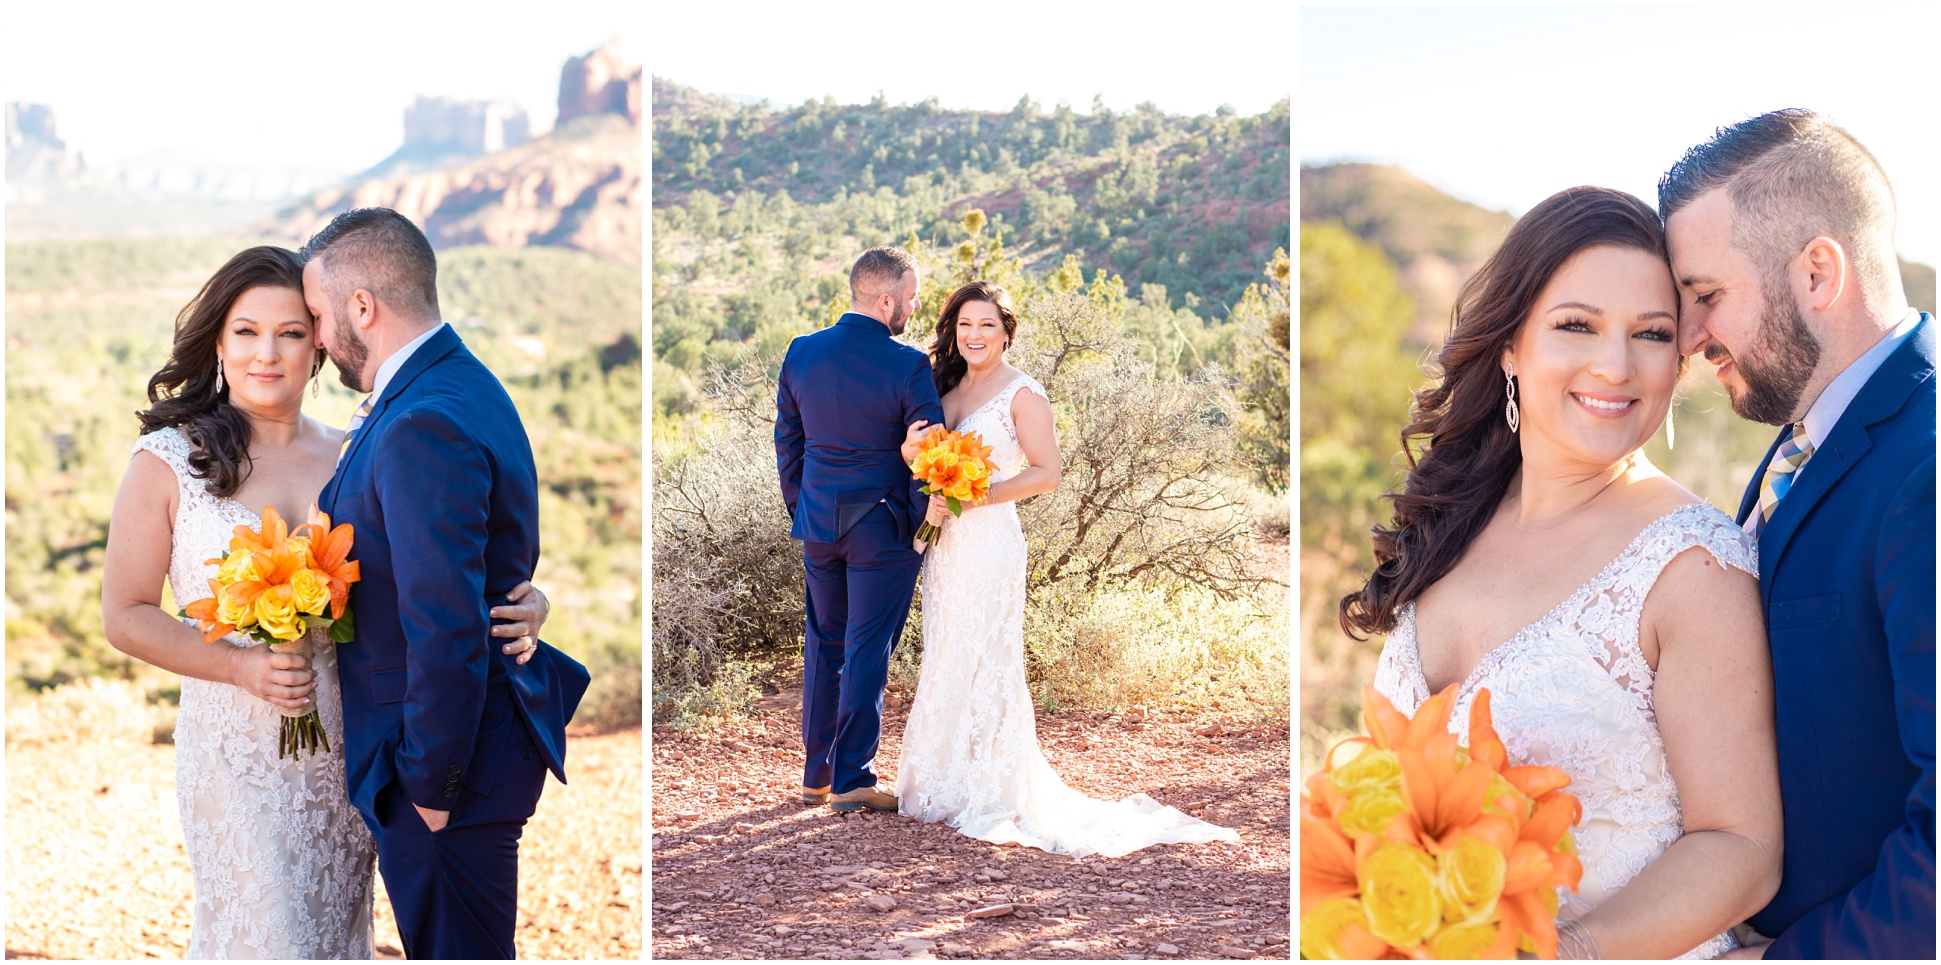 Three Images of Bride and Groom Portraits at Sedona Red Rocks